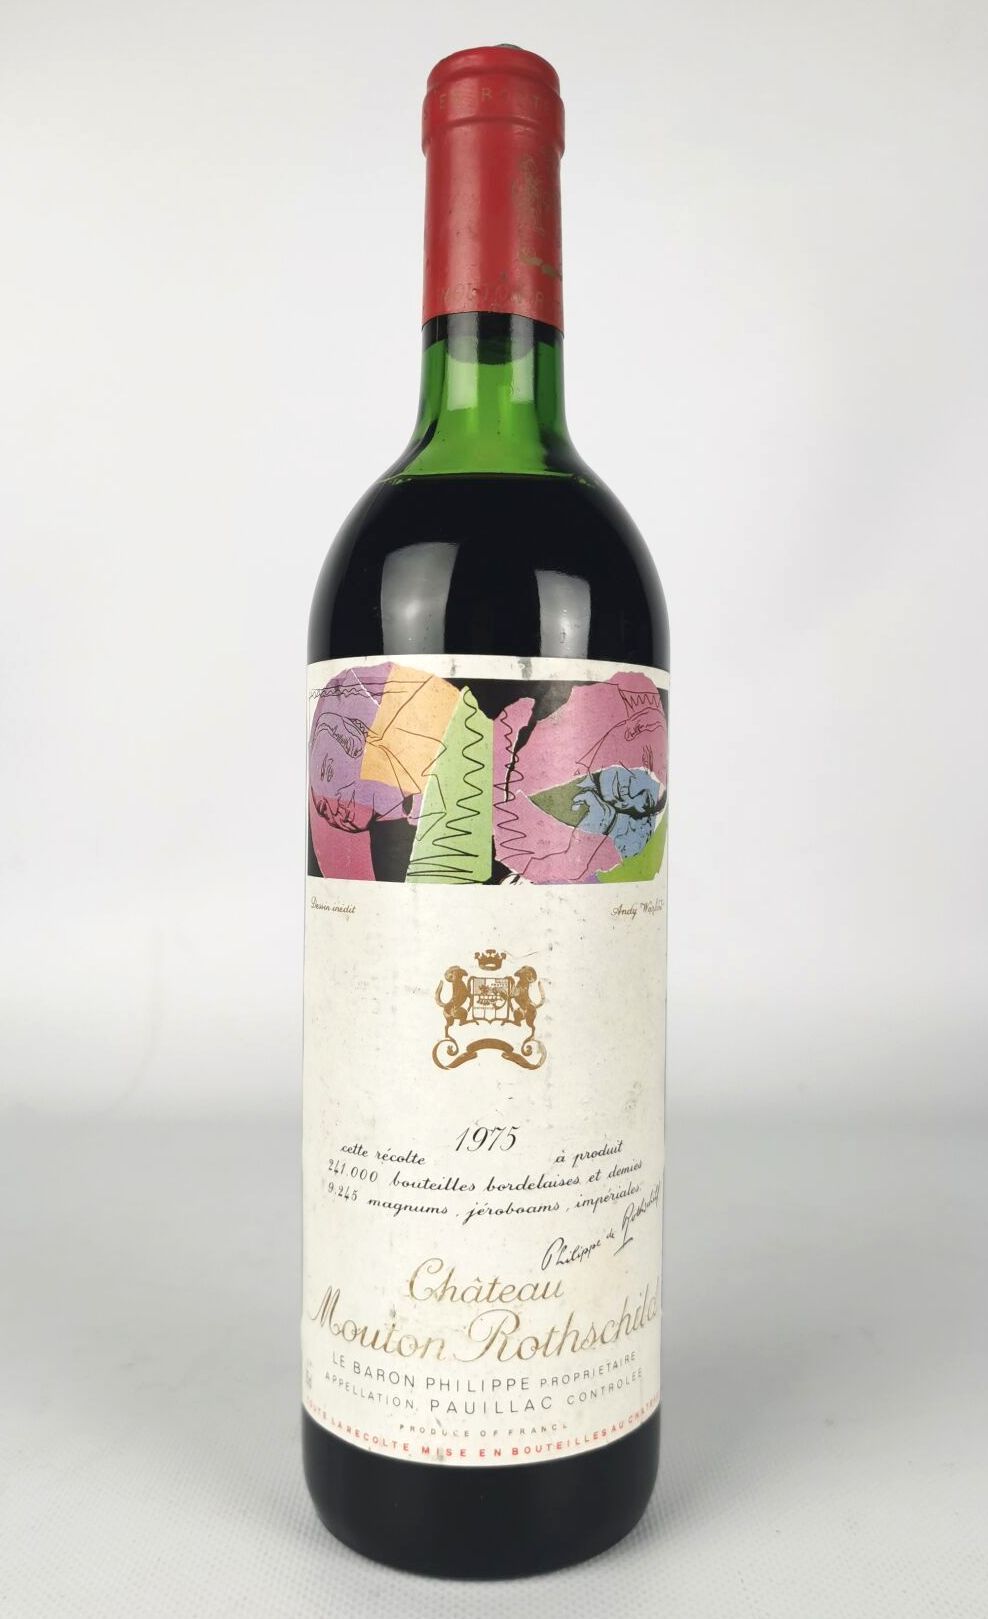 Null CHATEAU MOUTON ROTHSCHILD.
Jahrgang: 1975.
1 Flasche, e.